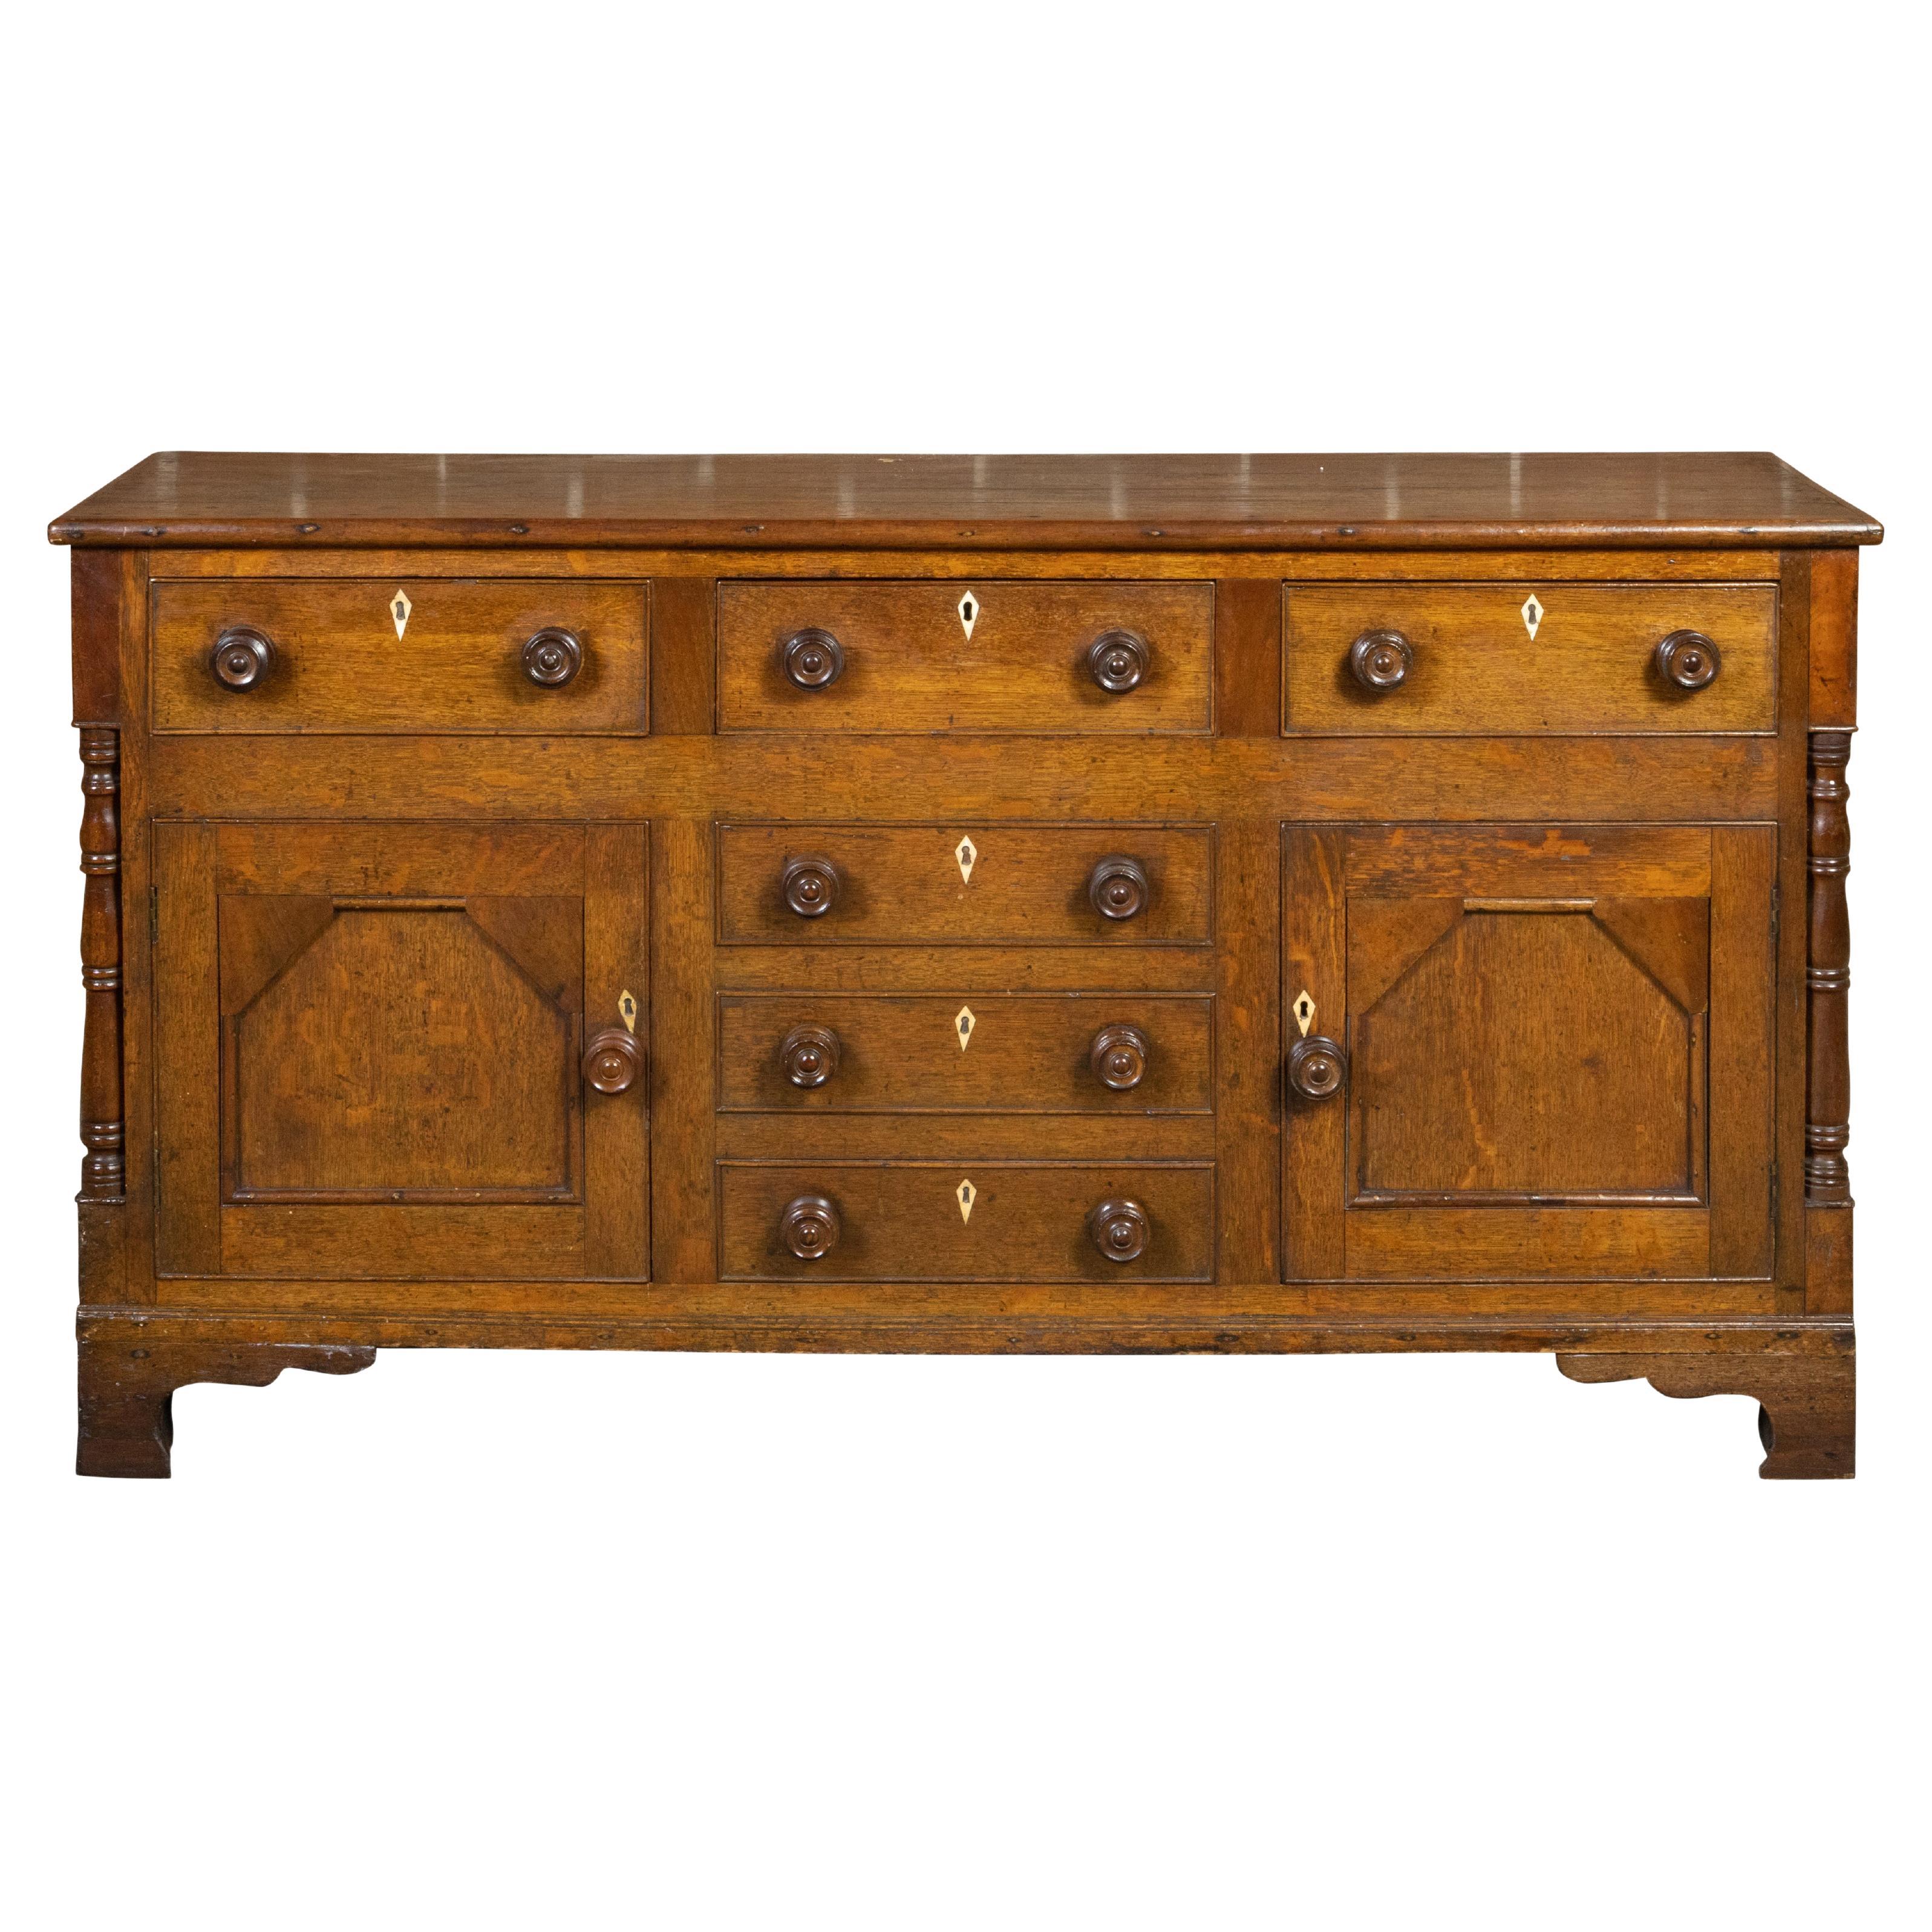 English 19th Century Oak Dresser Base with Six Drawers and Two Doors